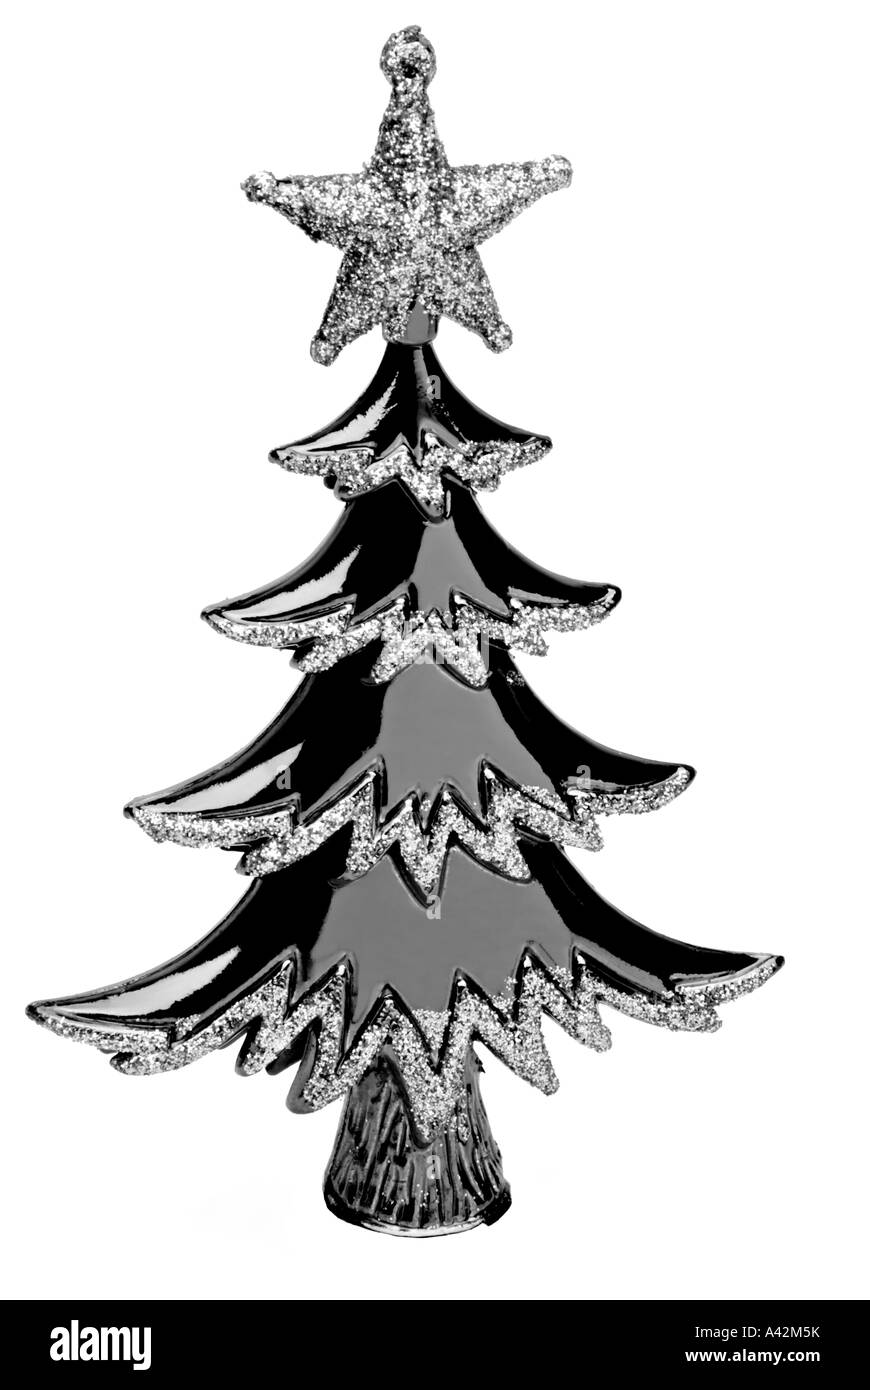 Single Christmas tree in Black and White Stock Photo